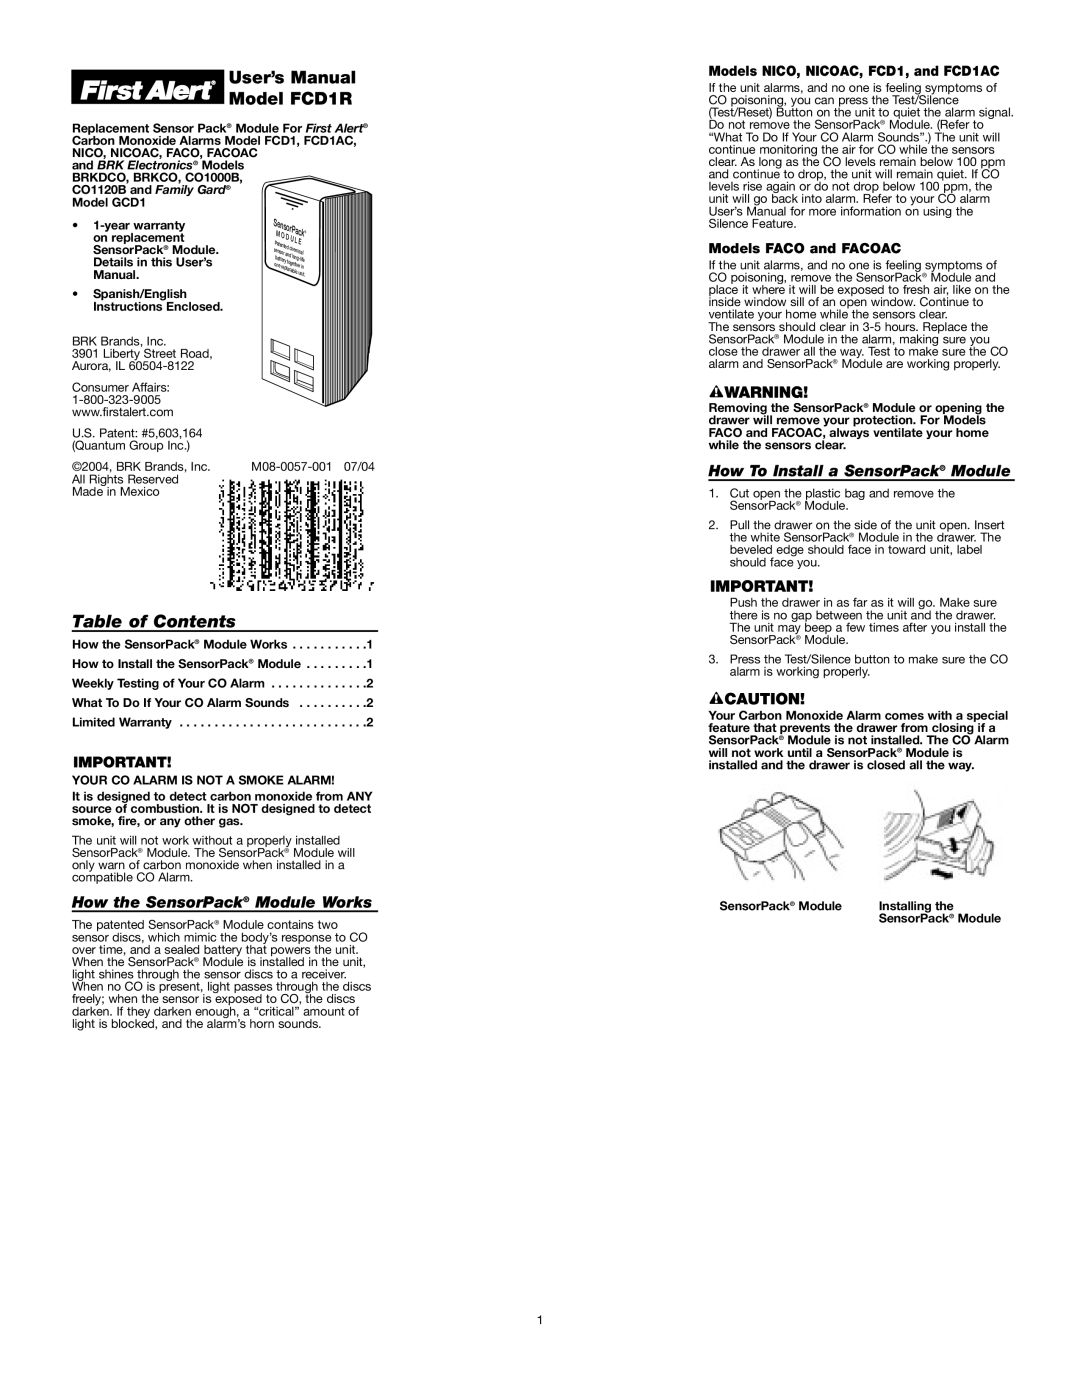 First Alert FCD1R user manual Table of Contents, How the SensorPack Module Works, How To Install a SensorPack Module 